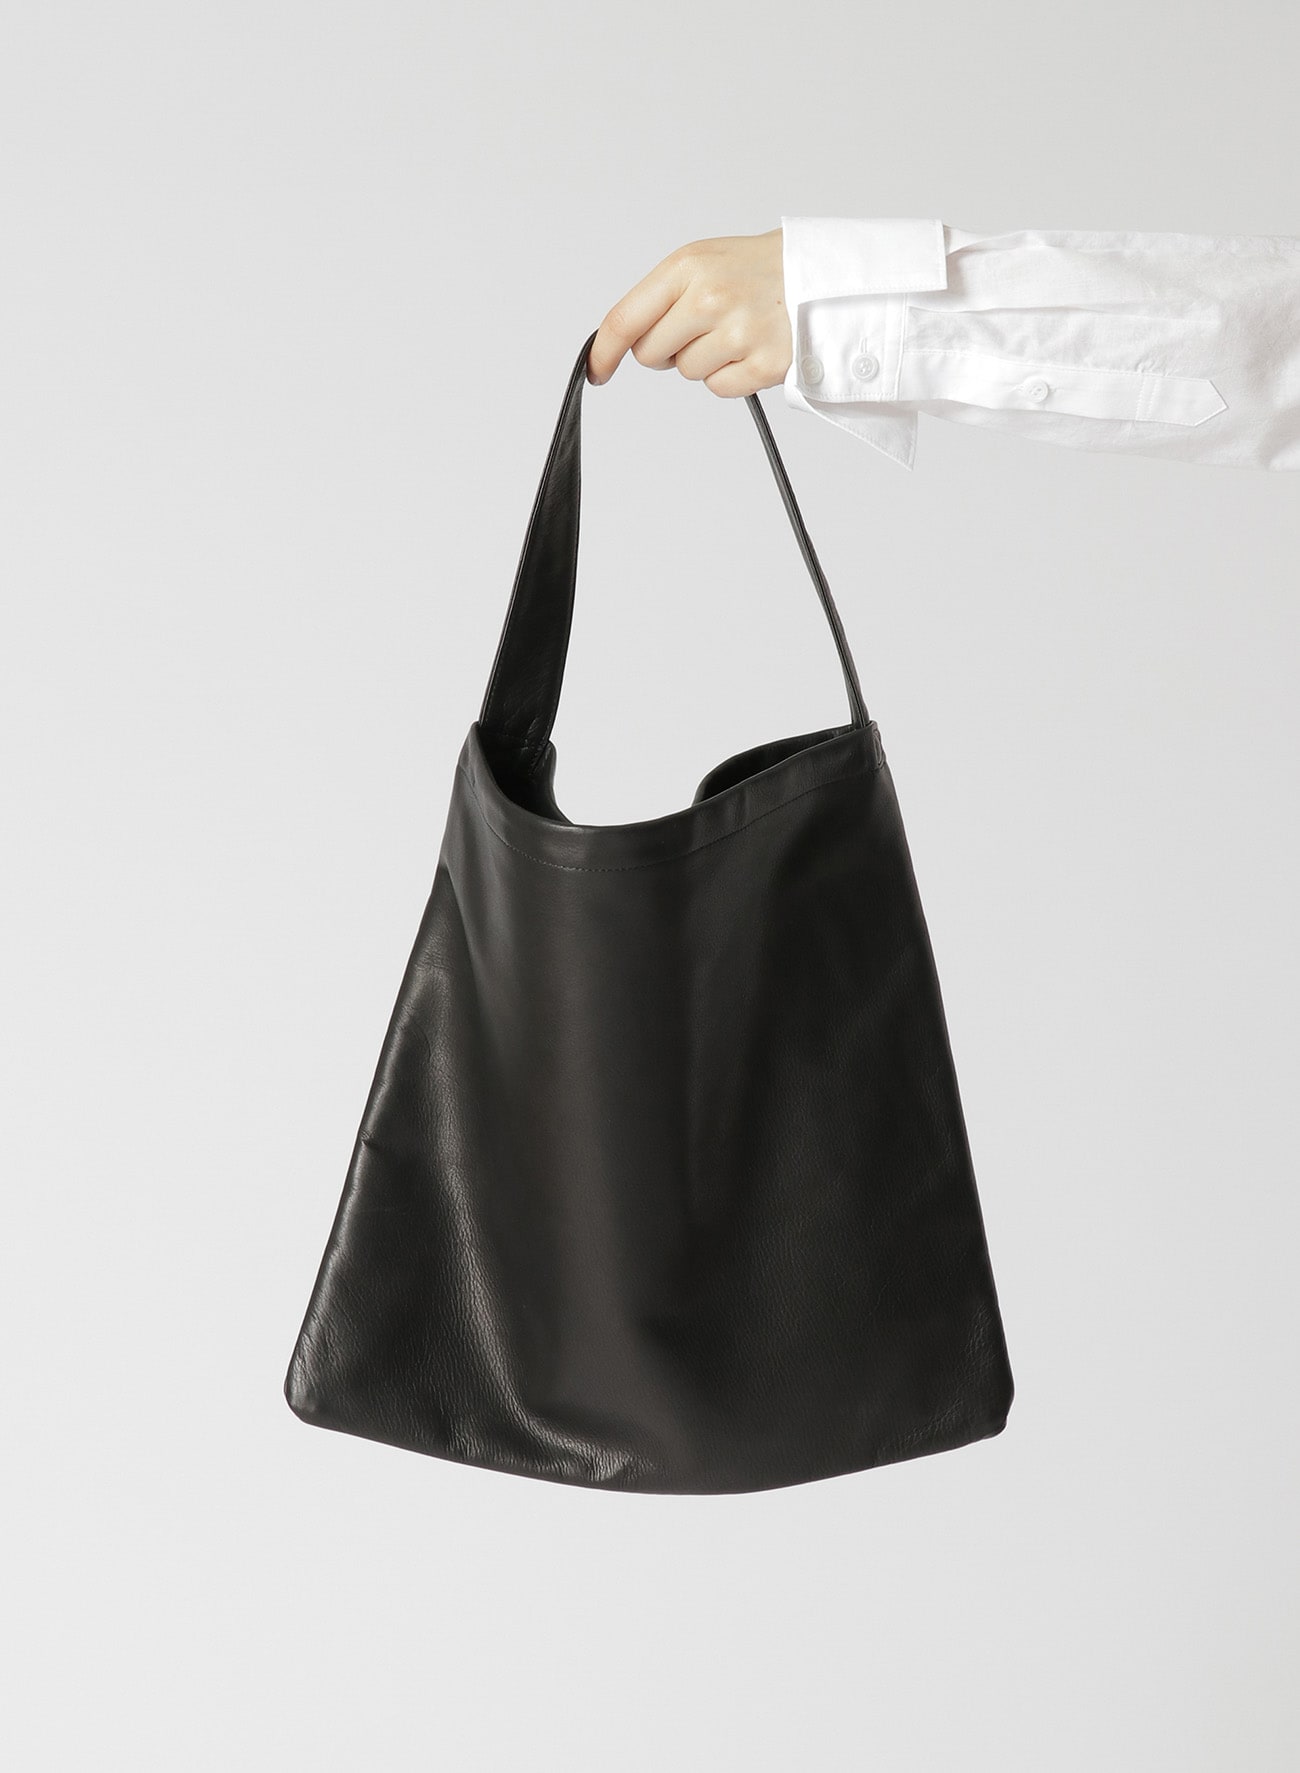 SOFT SMOOTH LEATHER FLAT TOTE BAG